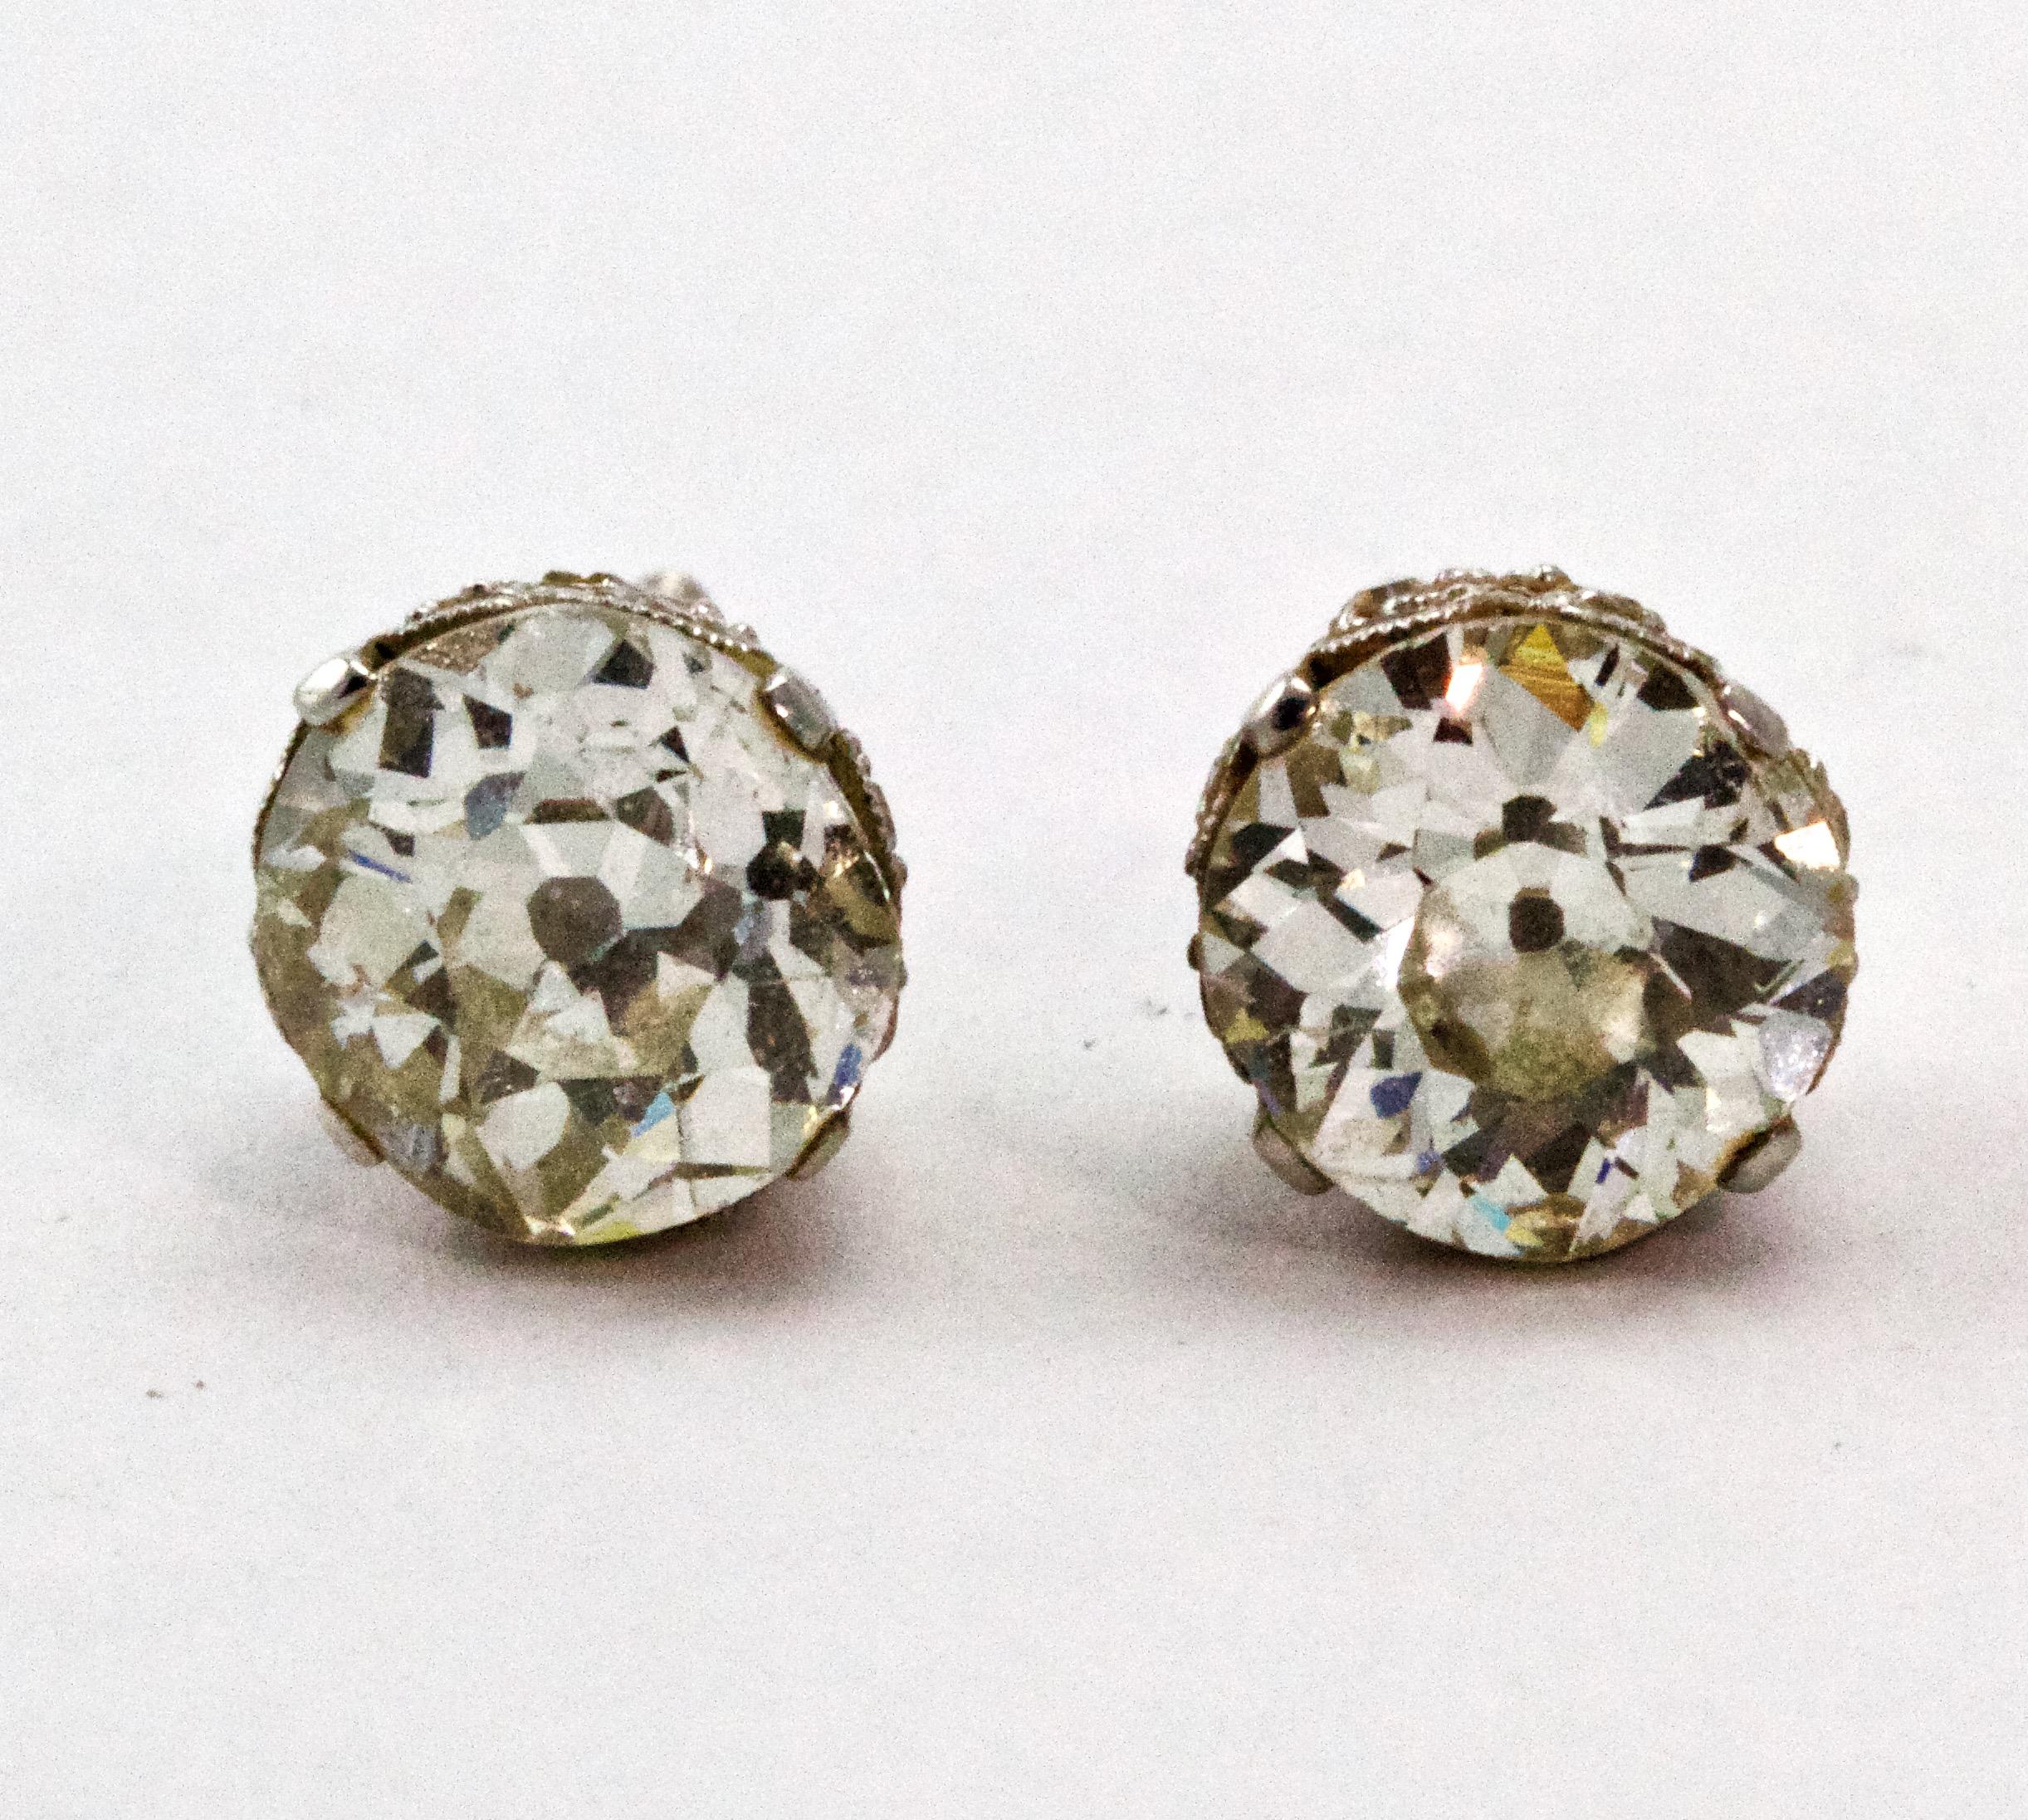 A spectacular pair of Art Deco diamond stud earrings. Showcasing two Old European Cut diamonds in diamond embellished coronet settings, complete with screw back fittings and modelled in platinum throughout. 
Diamonds : 1 carat 15 & 1 carat 17 (I -